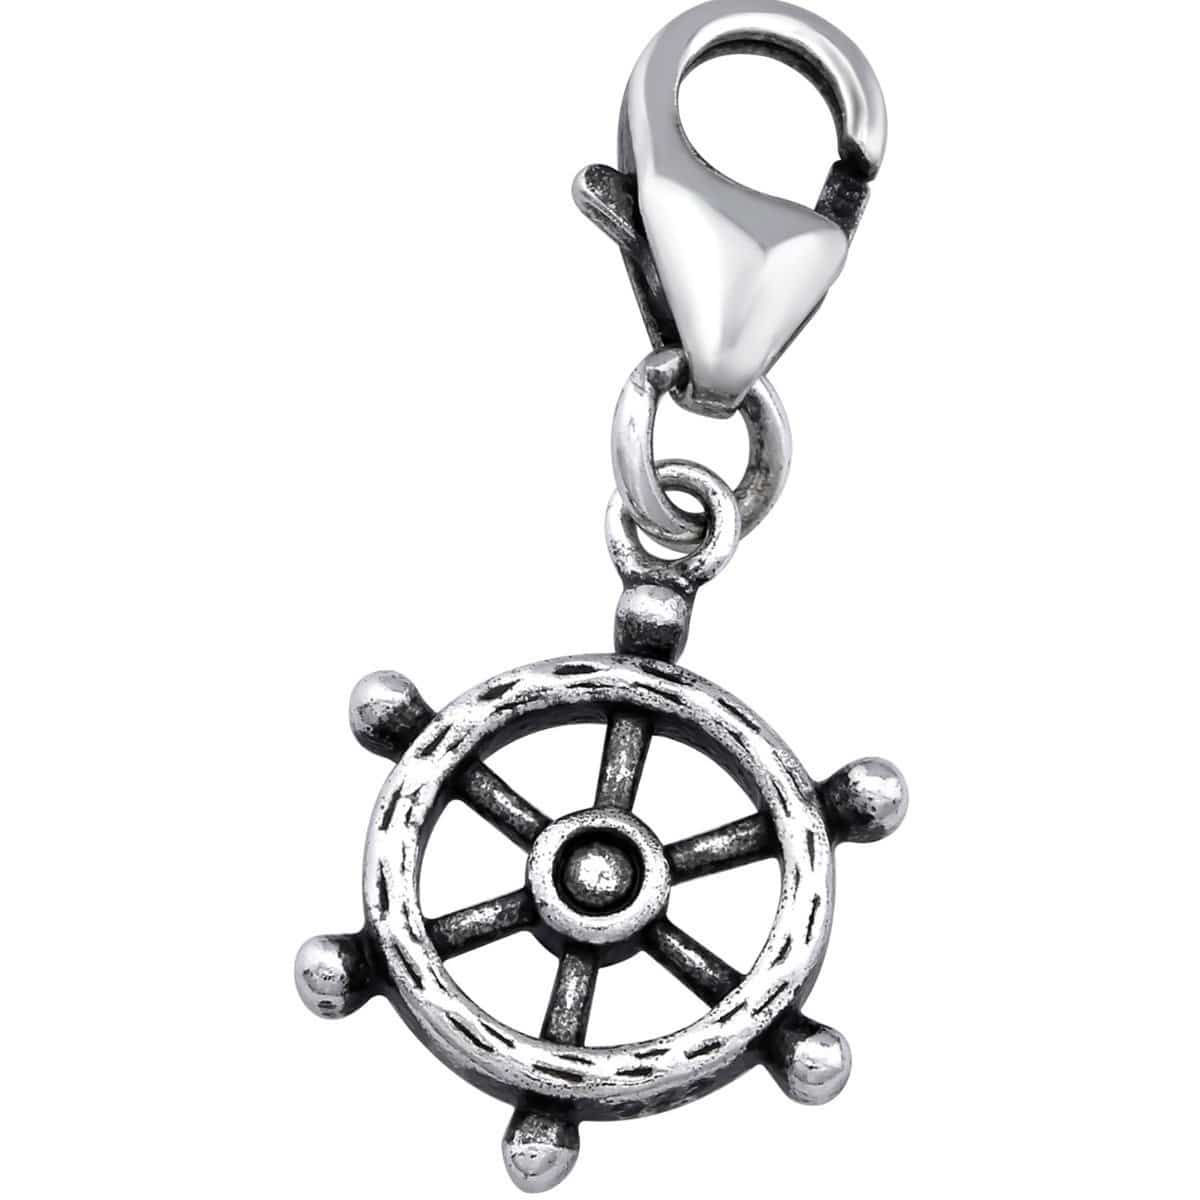 Sterling Silver Ship's Wheel Clip On Charm